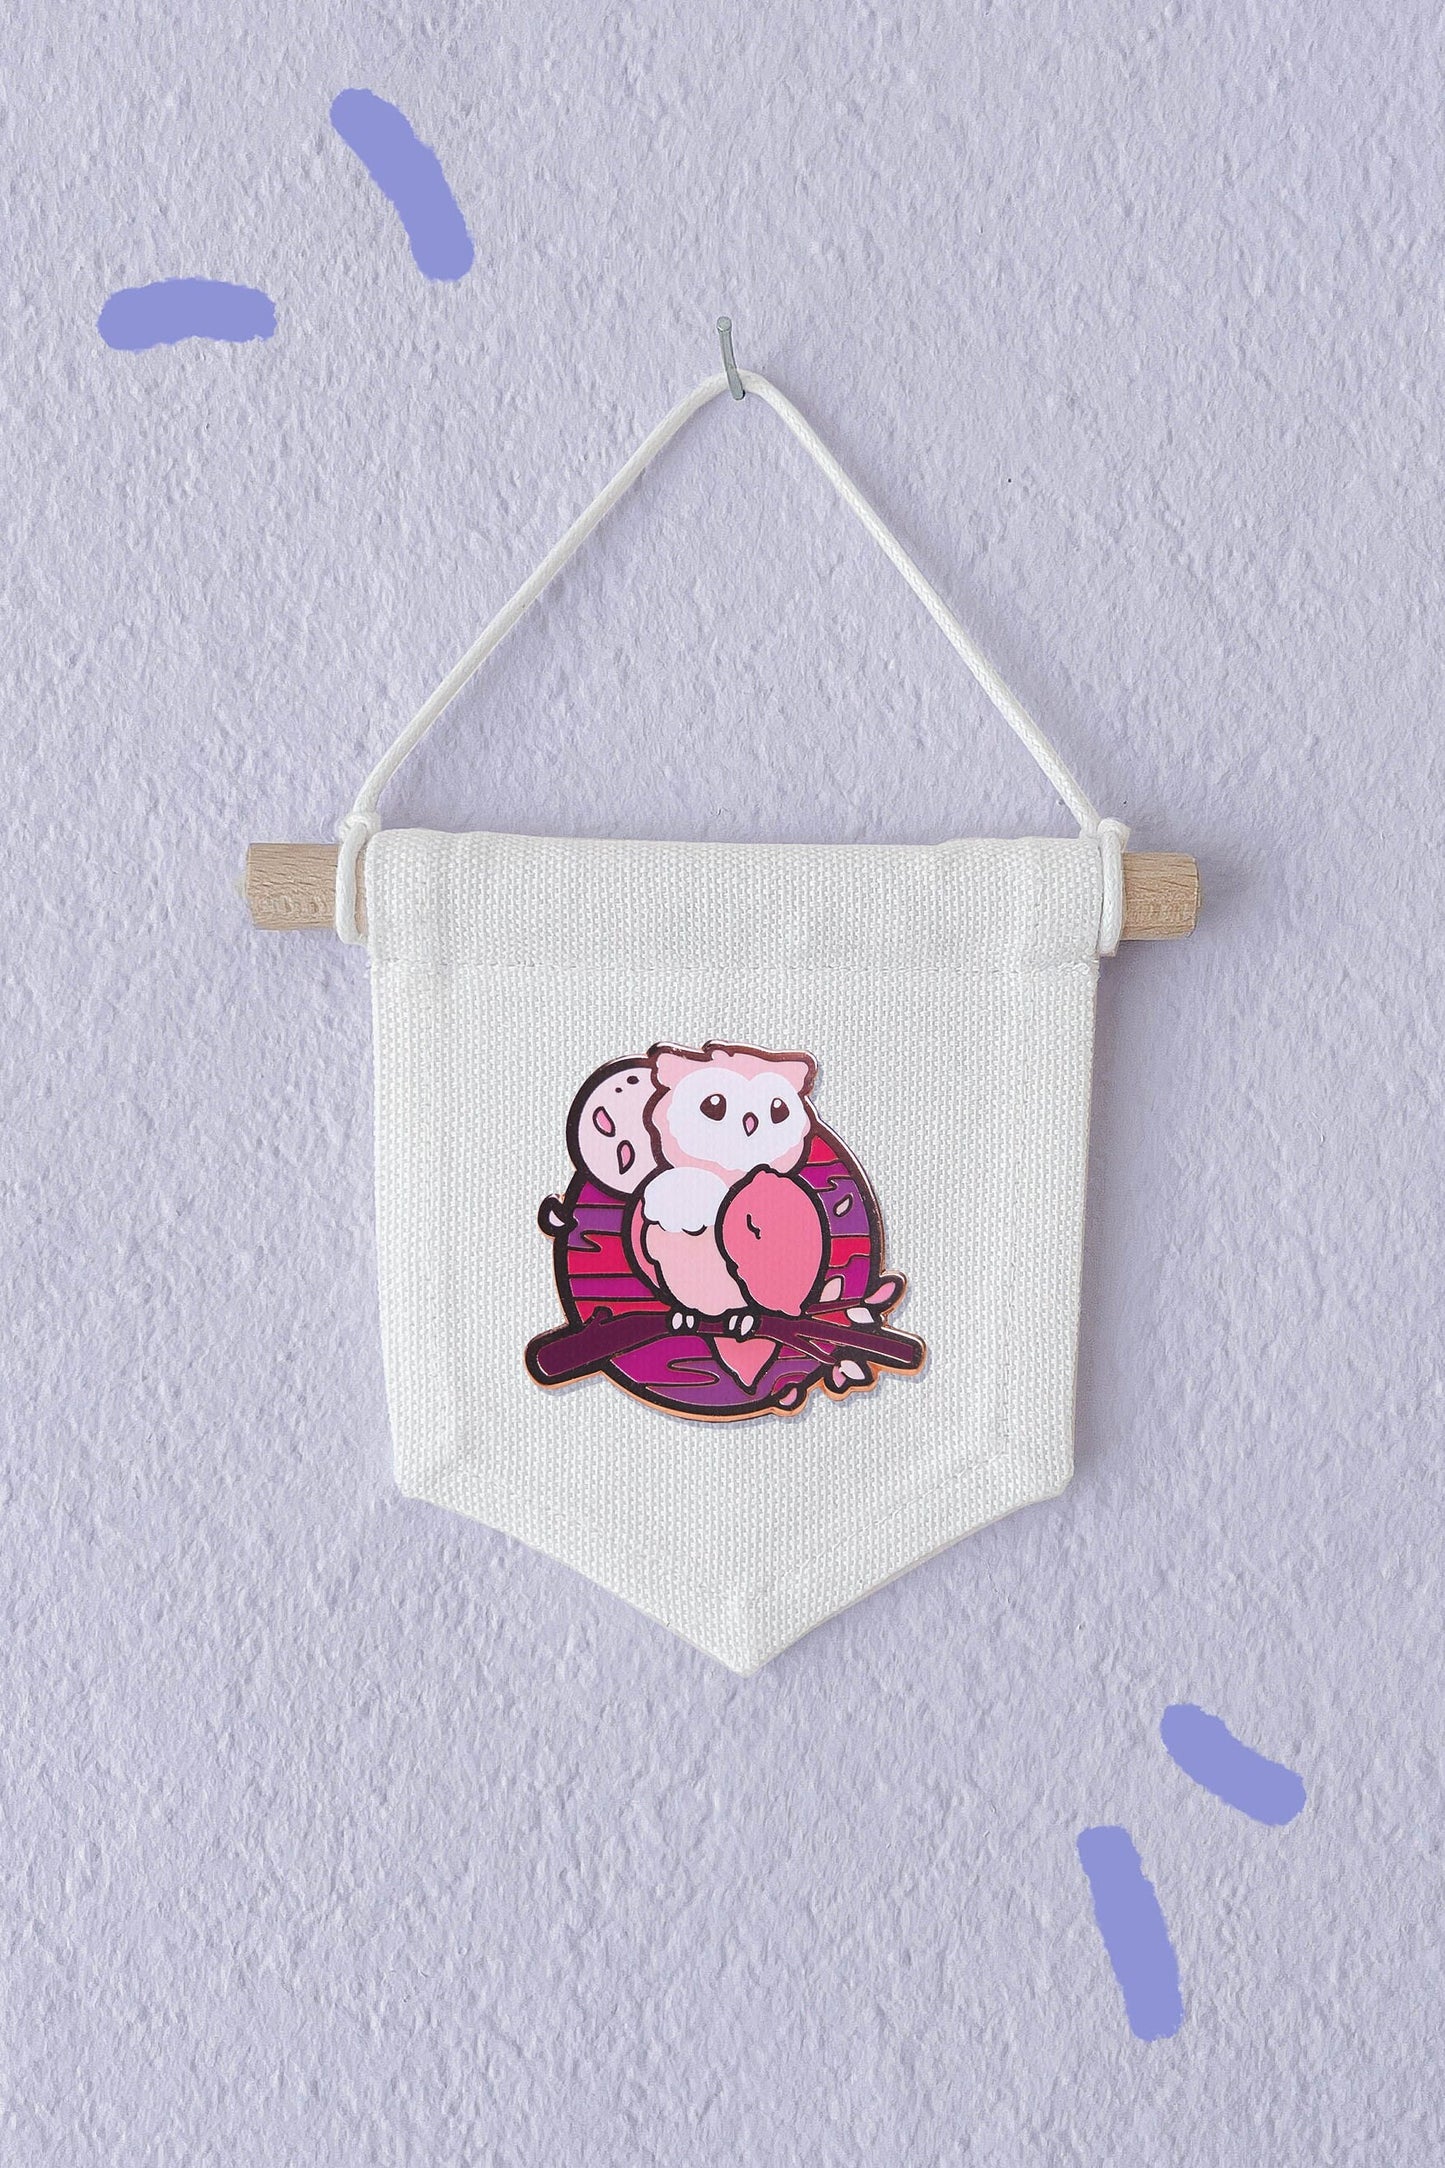 Cute Cotton Pin Banner | S 12cm x 10cm | Handmade in Germany | Off White Canvas Fabric | Classic Pin Display